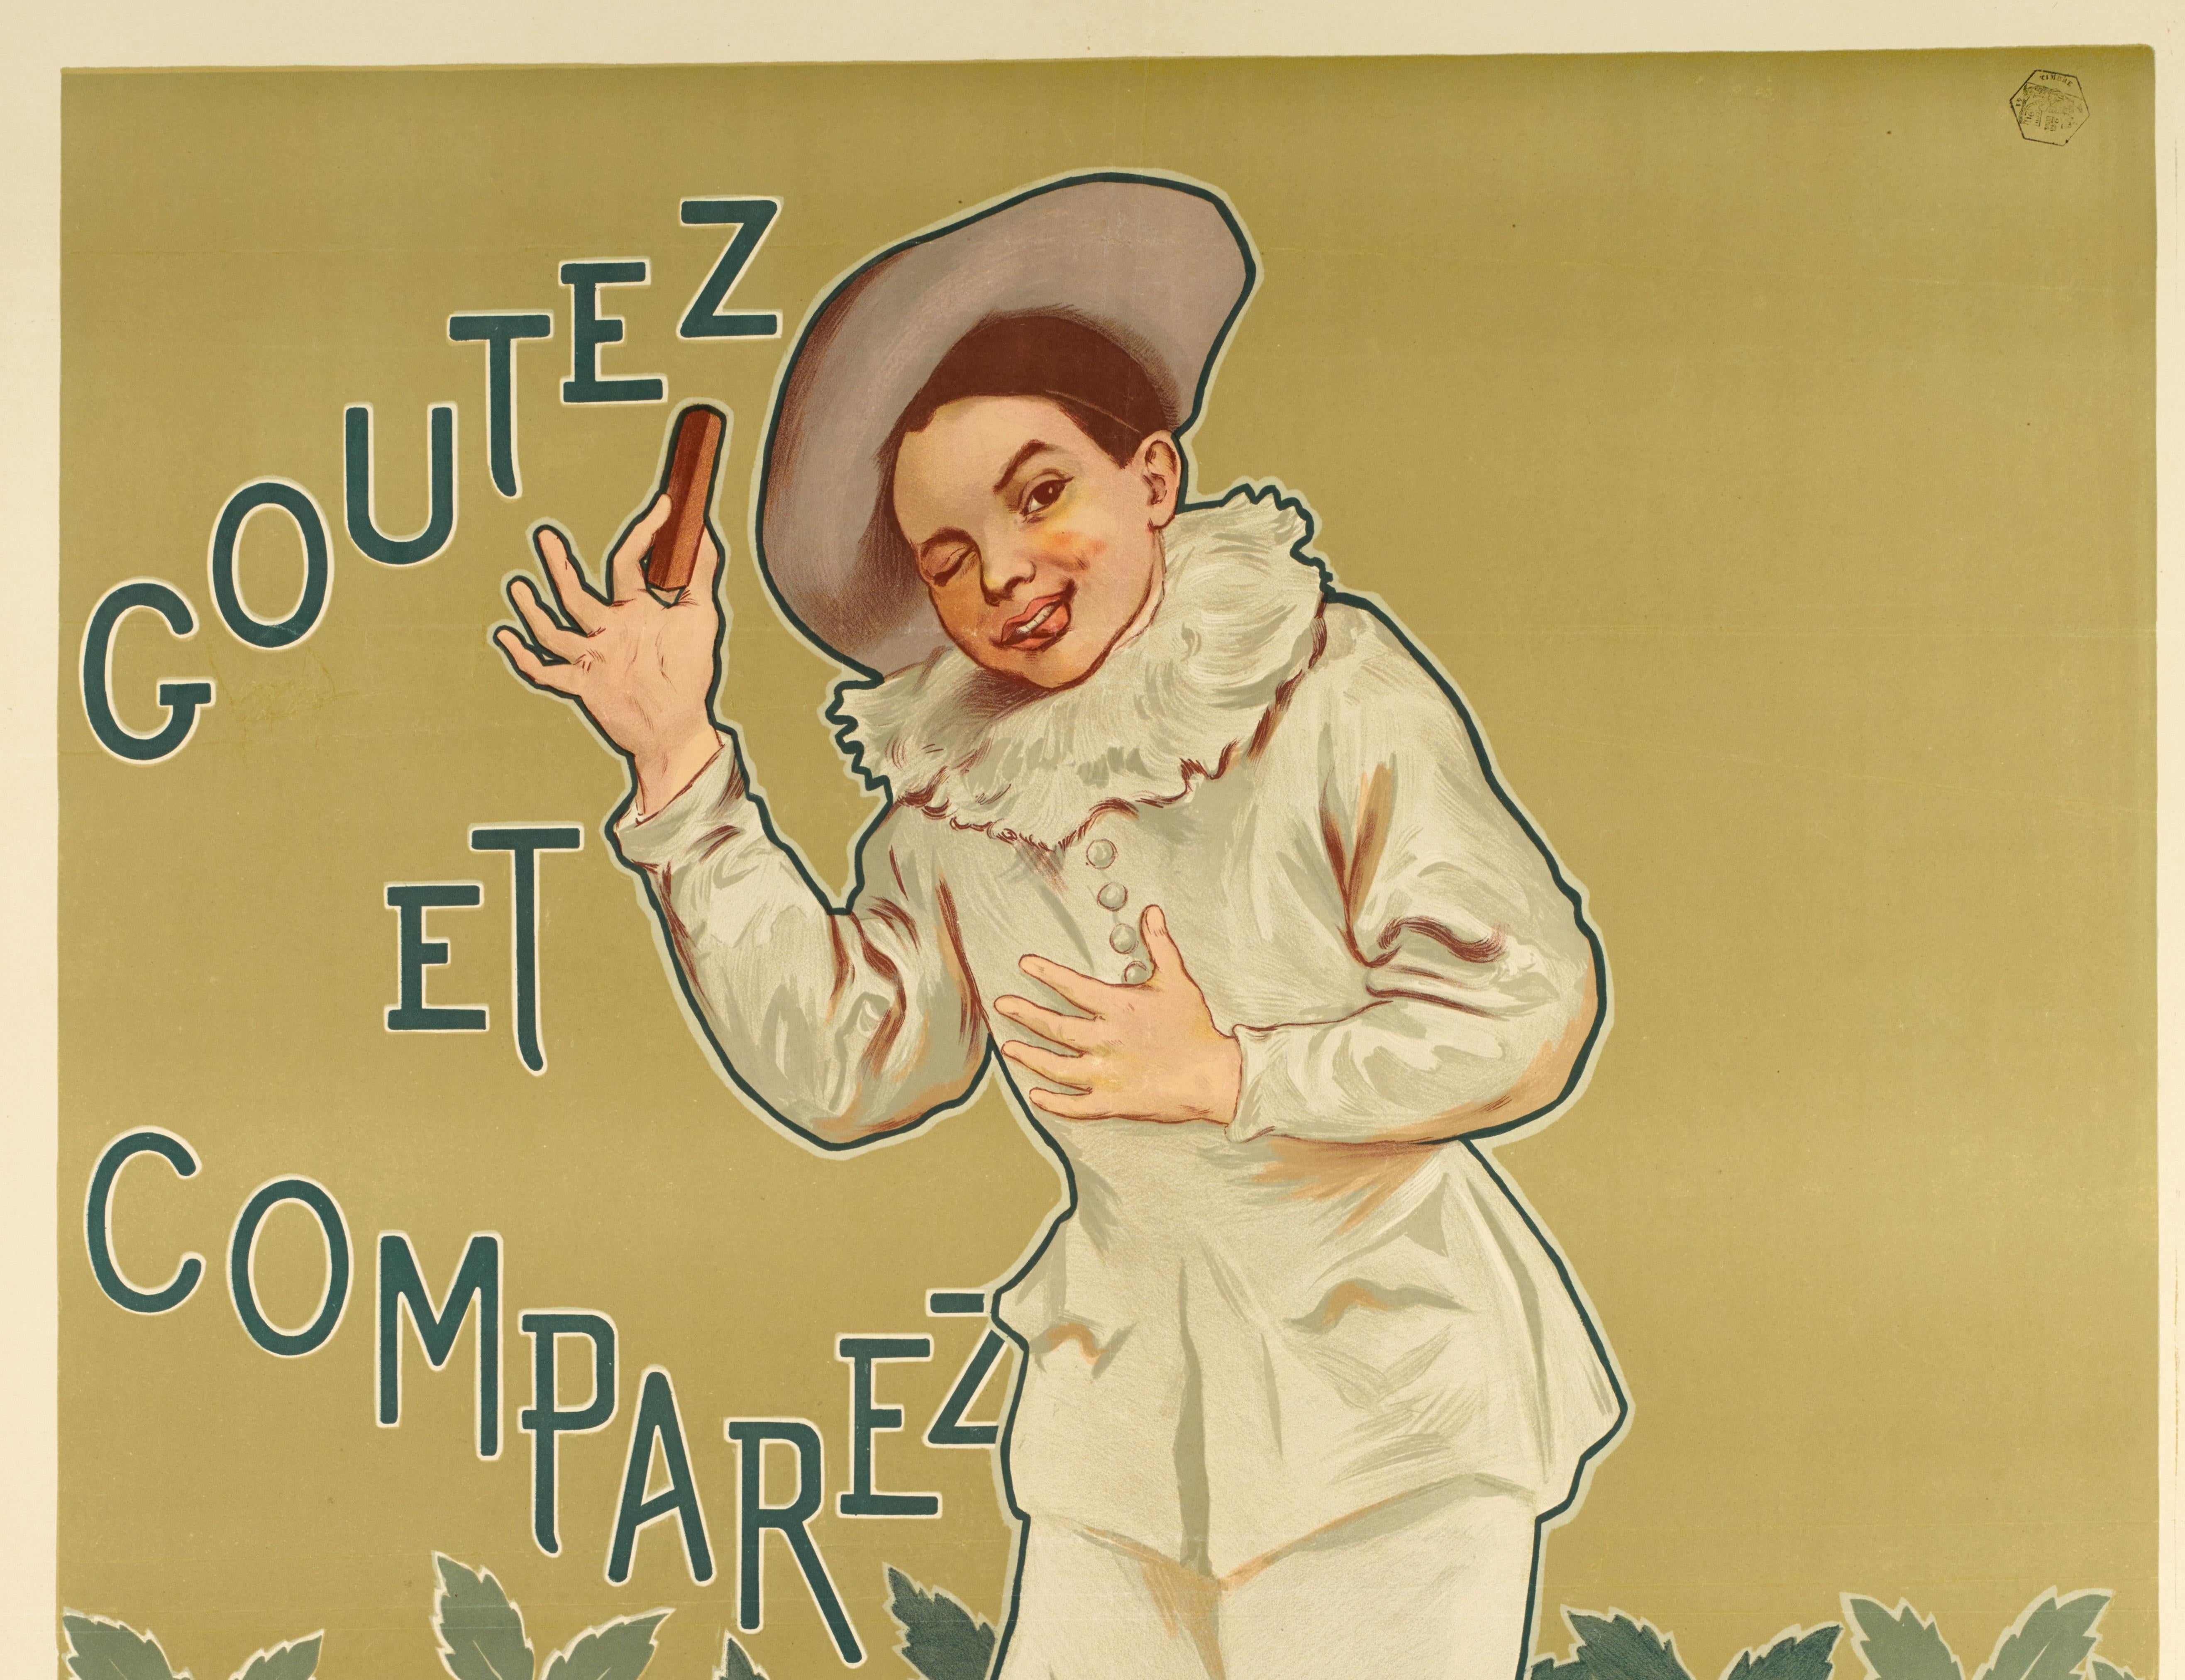 Original Cocoa Poster by Firmin Bouisset for Chocolat Poulain in 1898.

Artist: Firmin Bouisset (1859-1925)
Title: Chocolat Poulain
Date: vers 1898
Size: 36.6 x 50.8 in / 93 x 129 cm.
Printer: Imp. H.LAAS E. PECAUD & Cie, Paris
Materials and